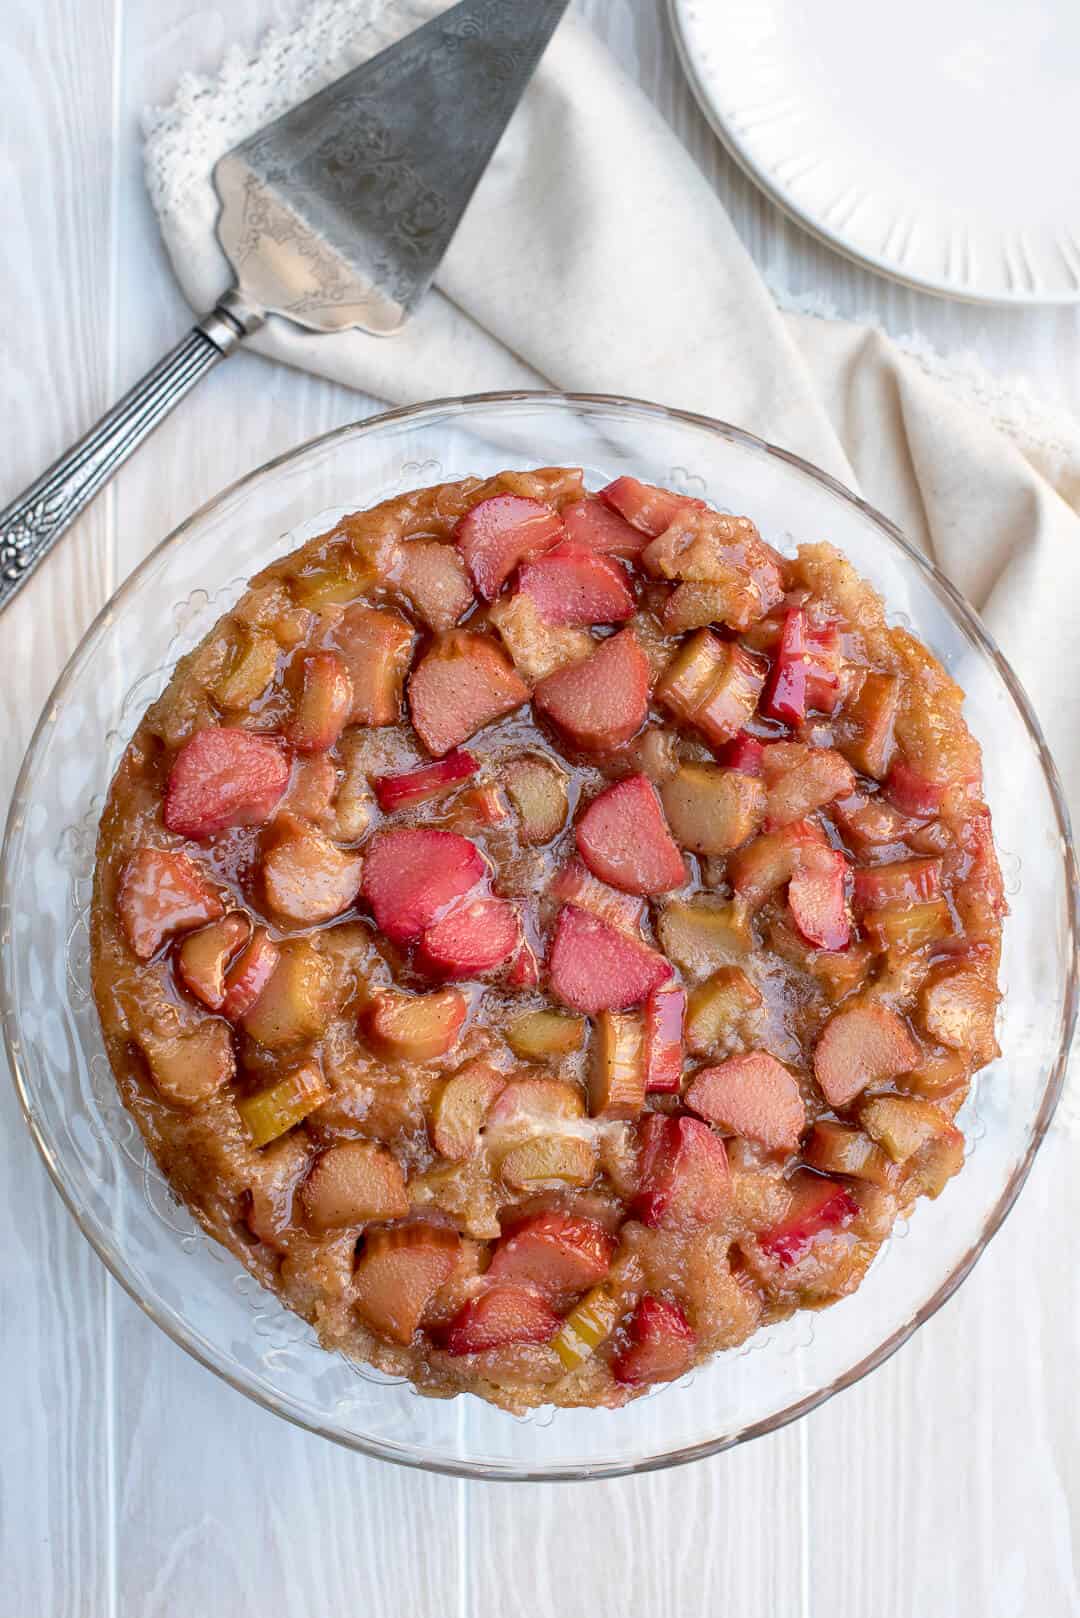 An over the top image of Rhubarb Upside Down Cake on a glass cake plate.